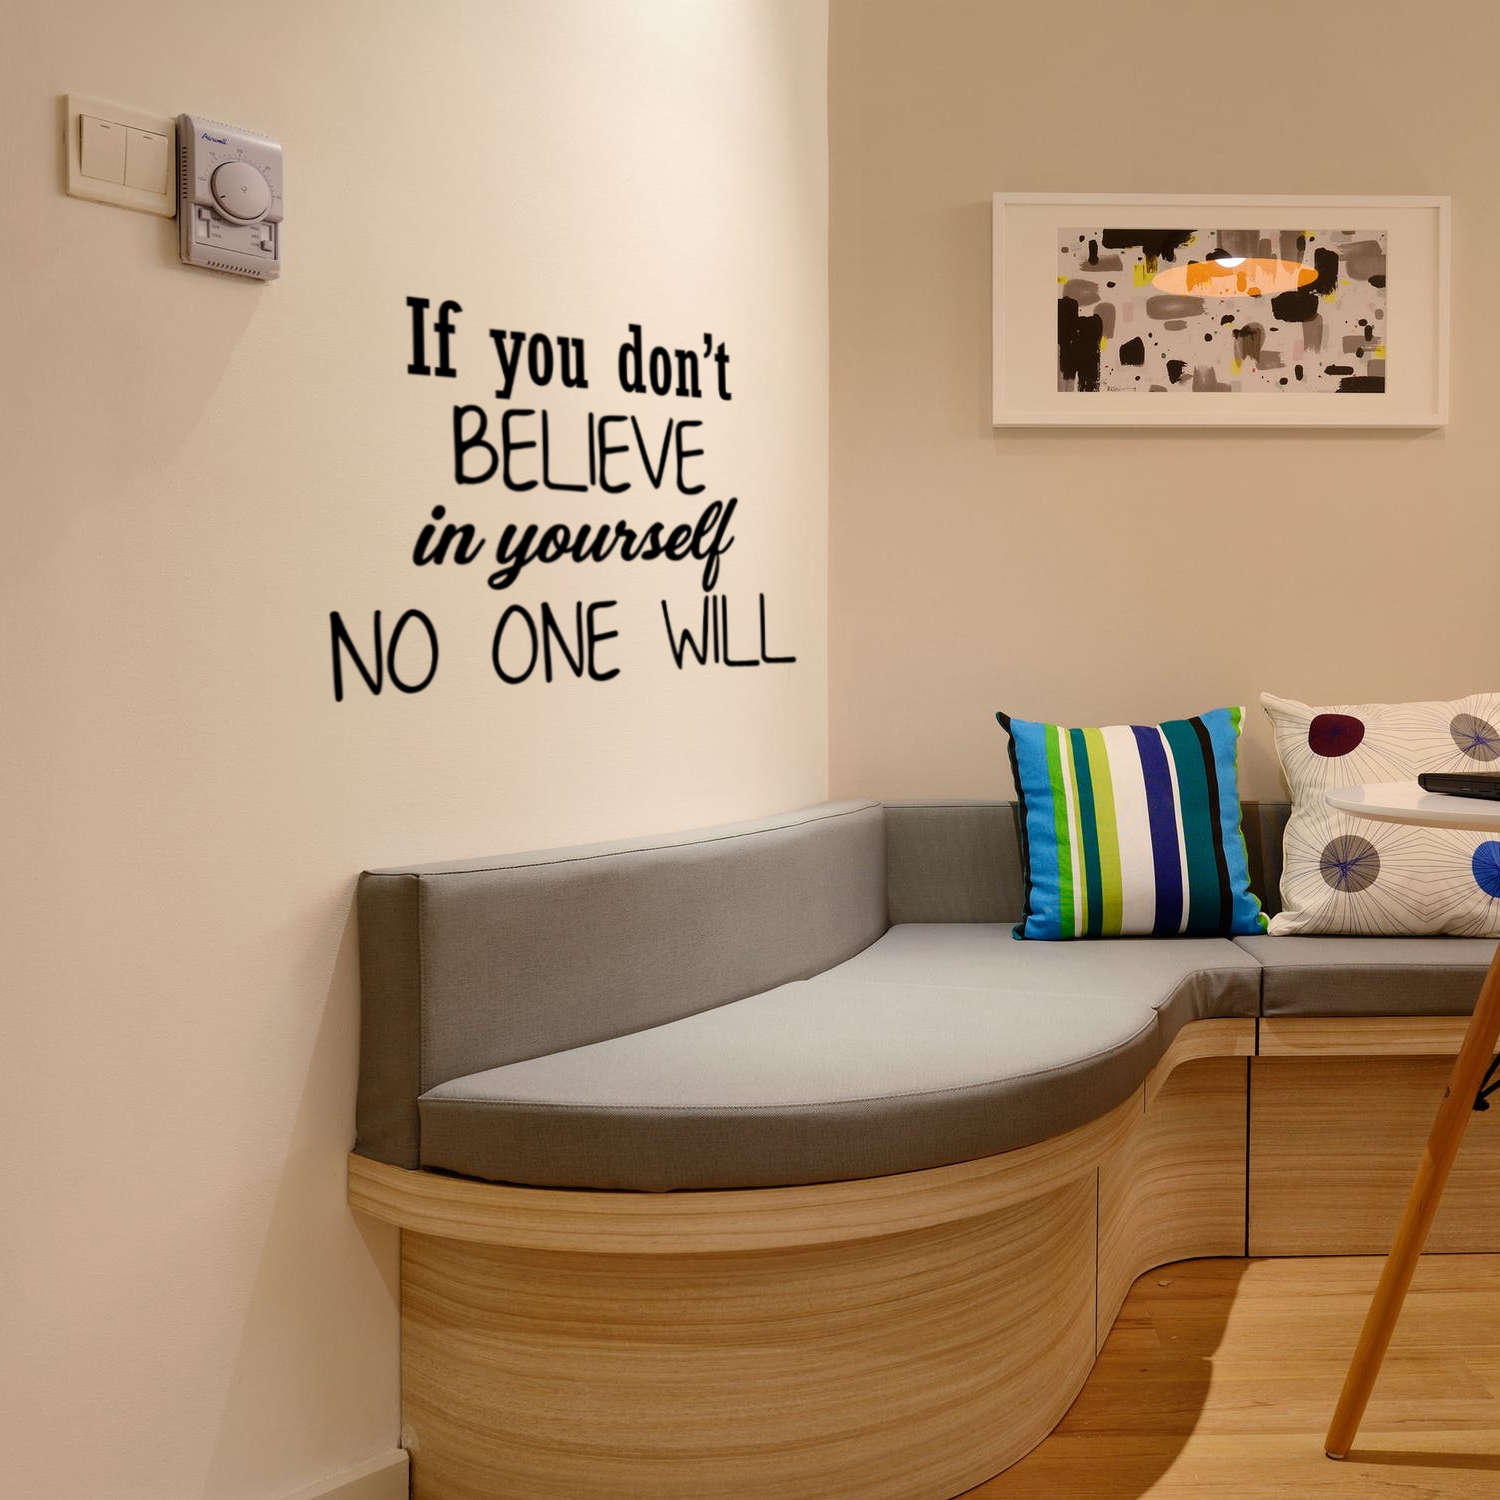 Inspirational Quotes Wall Art Vinyl Decal 20 X 27 Bedroom Vinyl Decals No One Will If You Dont Believe In Yourself Motivational Wall Art Decal Life Quotes Vinyl Sticker Wall Decor Home